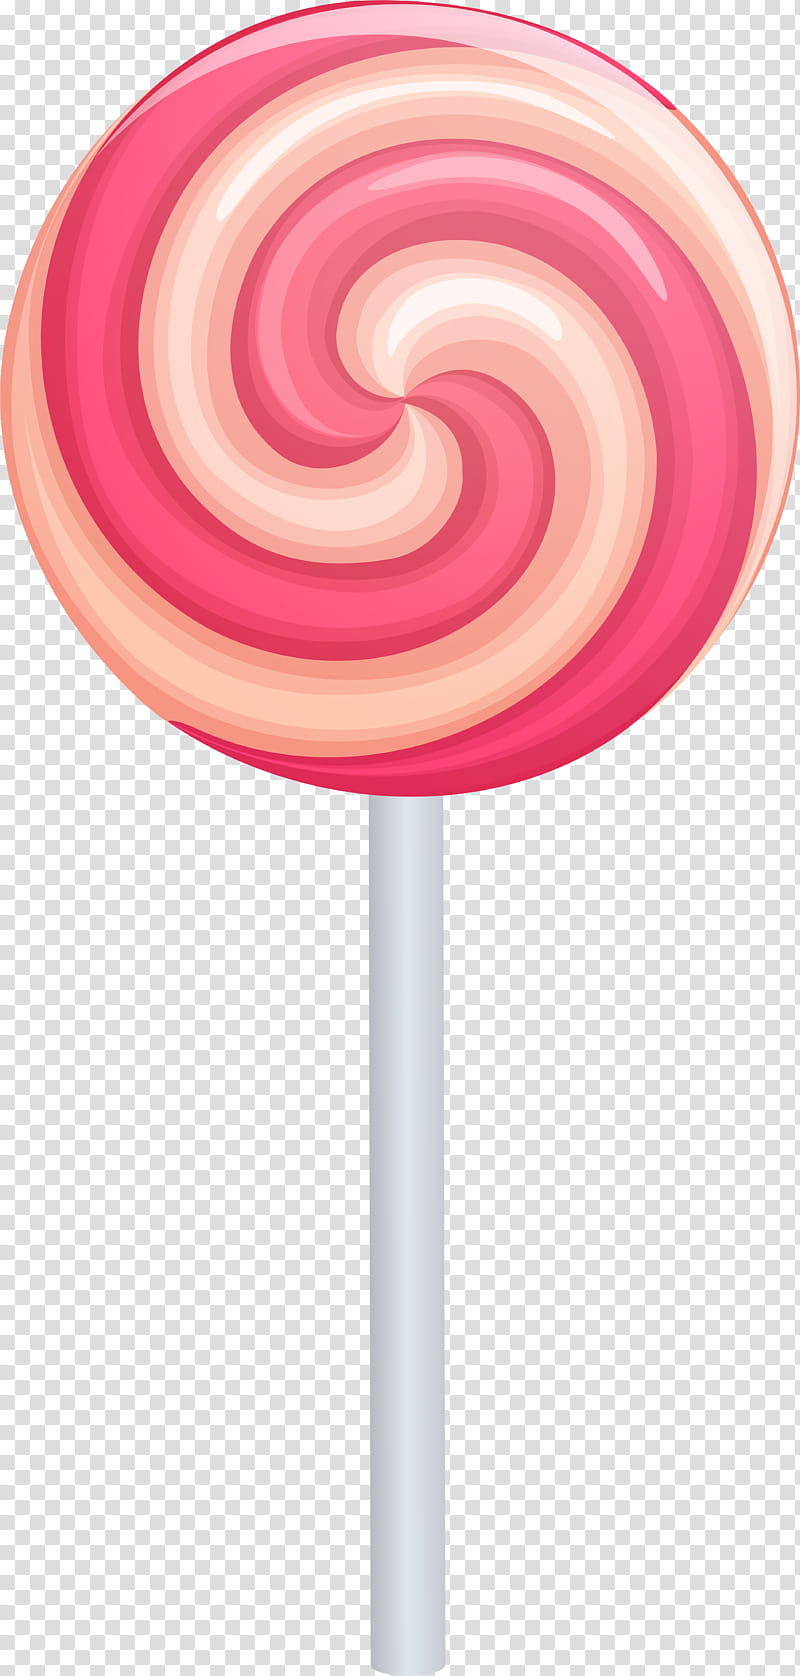 Lollipop, Candy, Confectionery, Food, Stick Candy, Pink, Magenta, Spiral transparent background PNG clipart